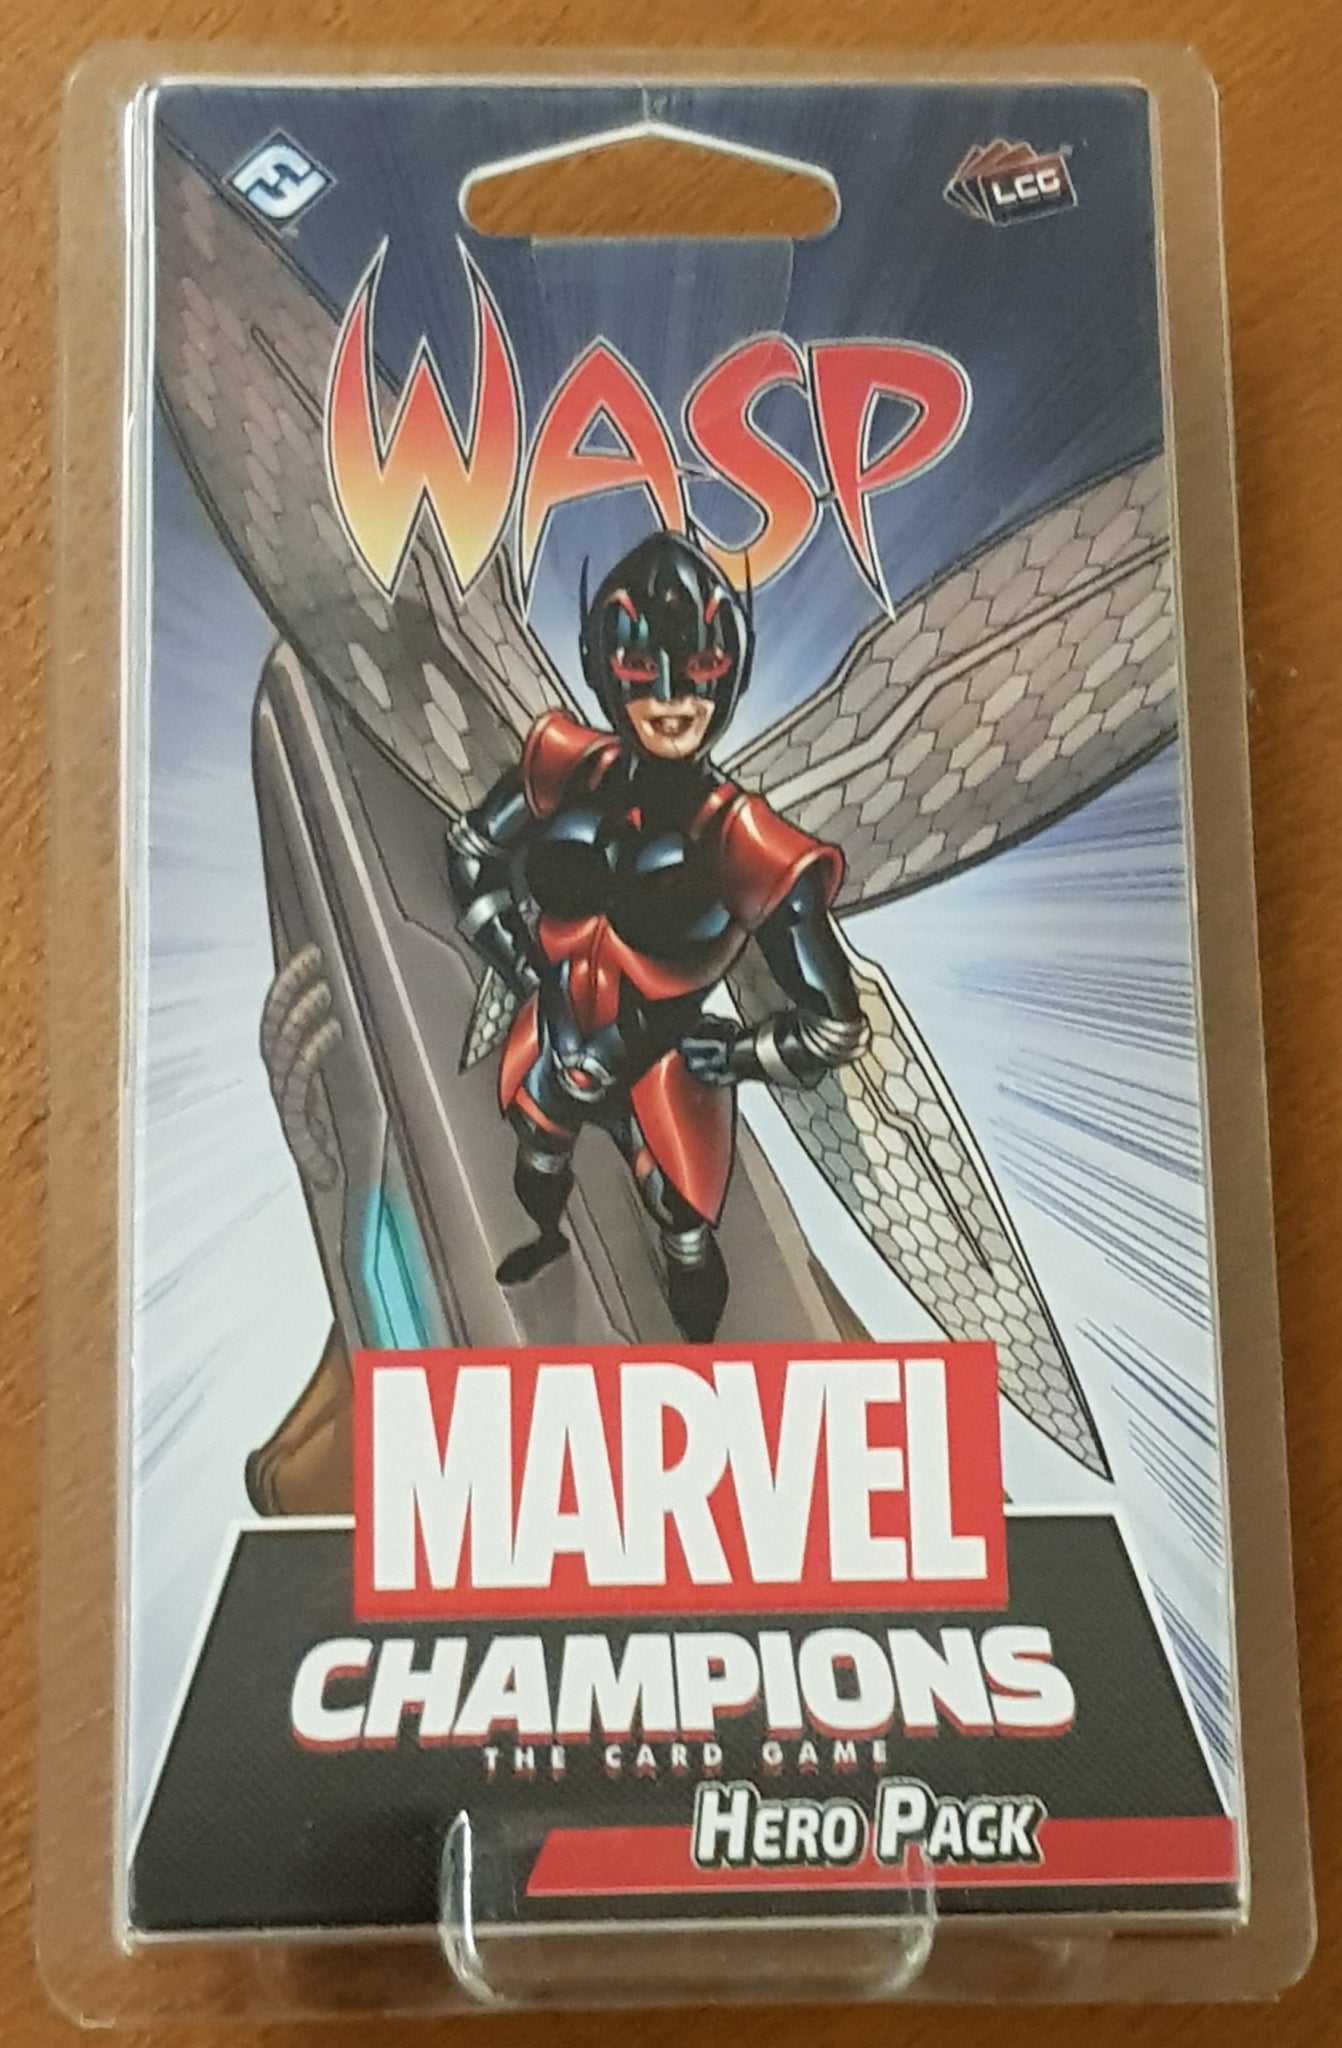 Marvel Champions the Card Game Wasp Hero Pack